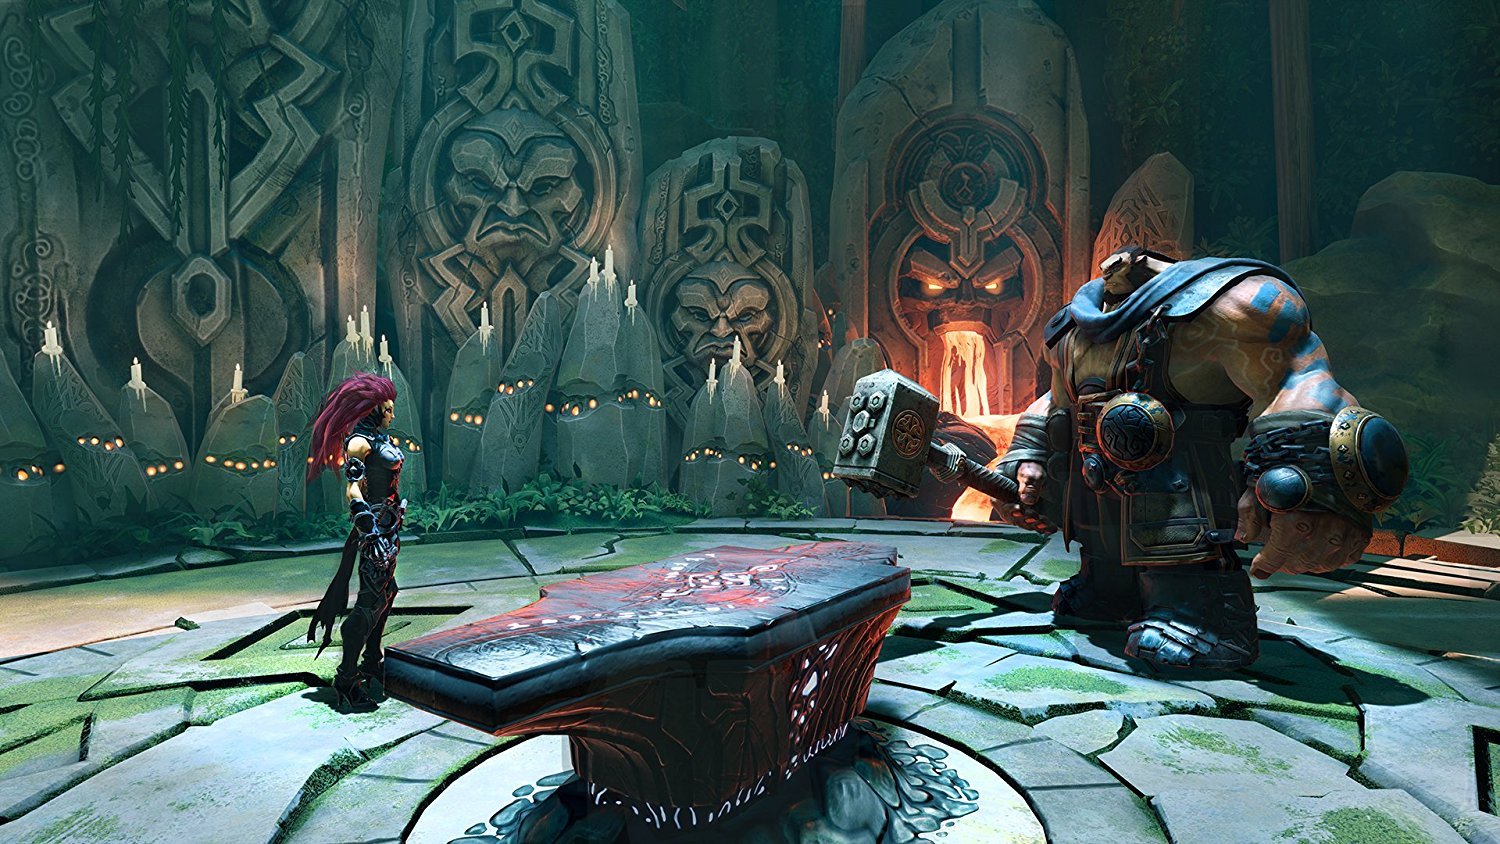 darksiders-3-leaked-with-screenshots-and-details-149372020427.jpg